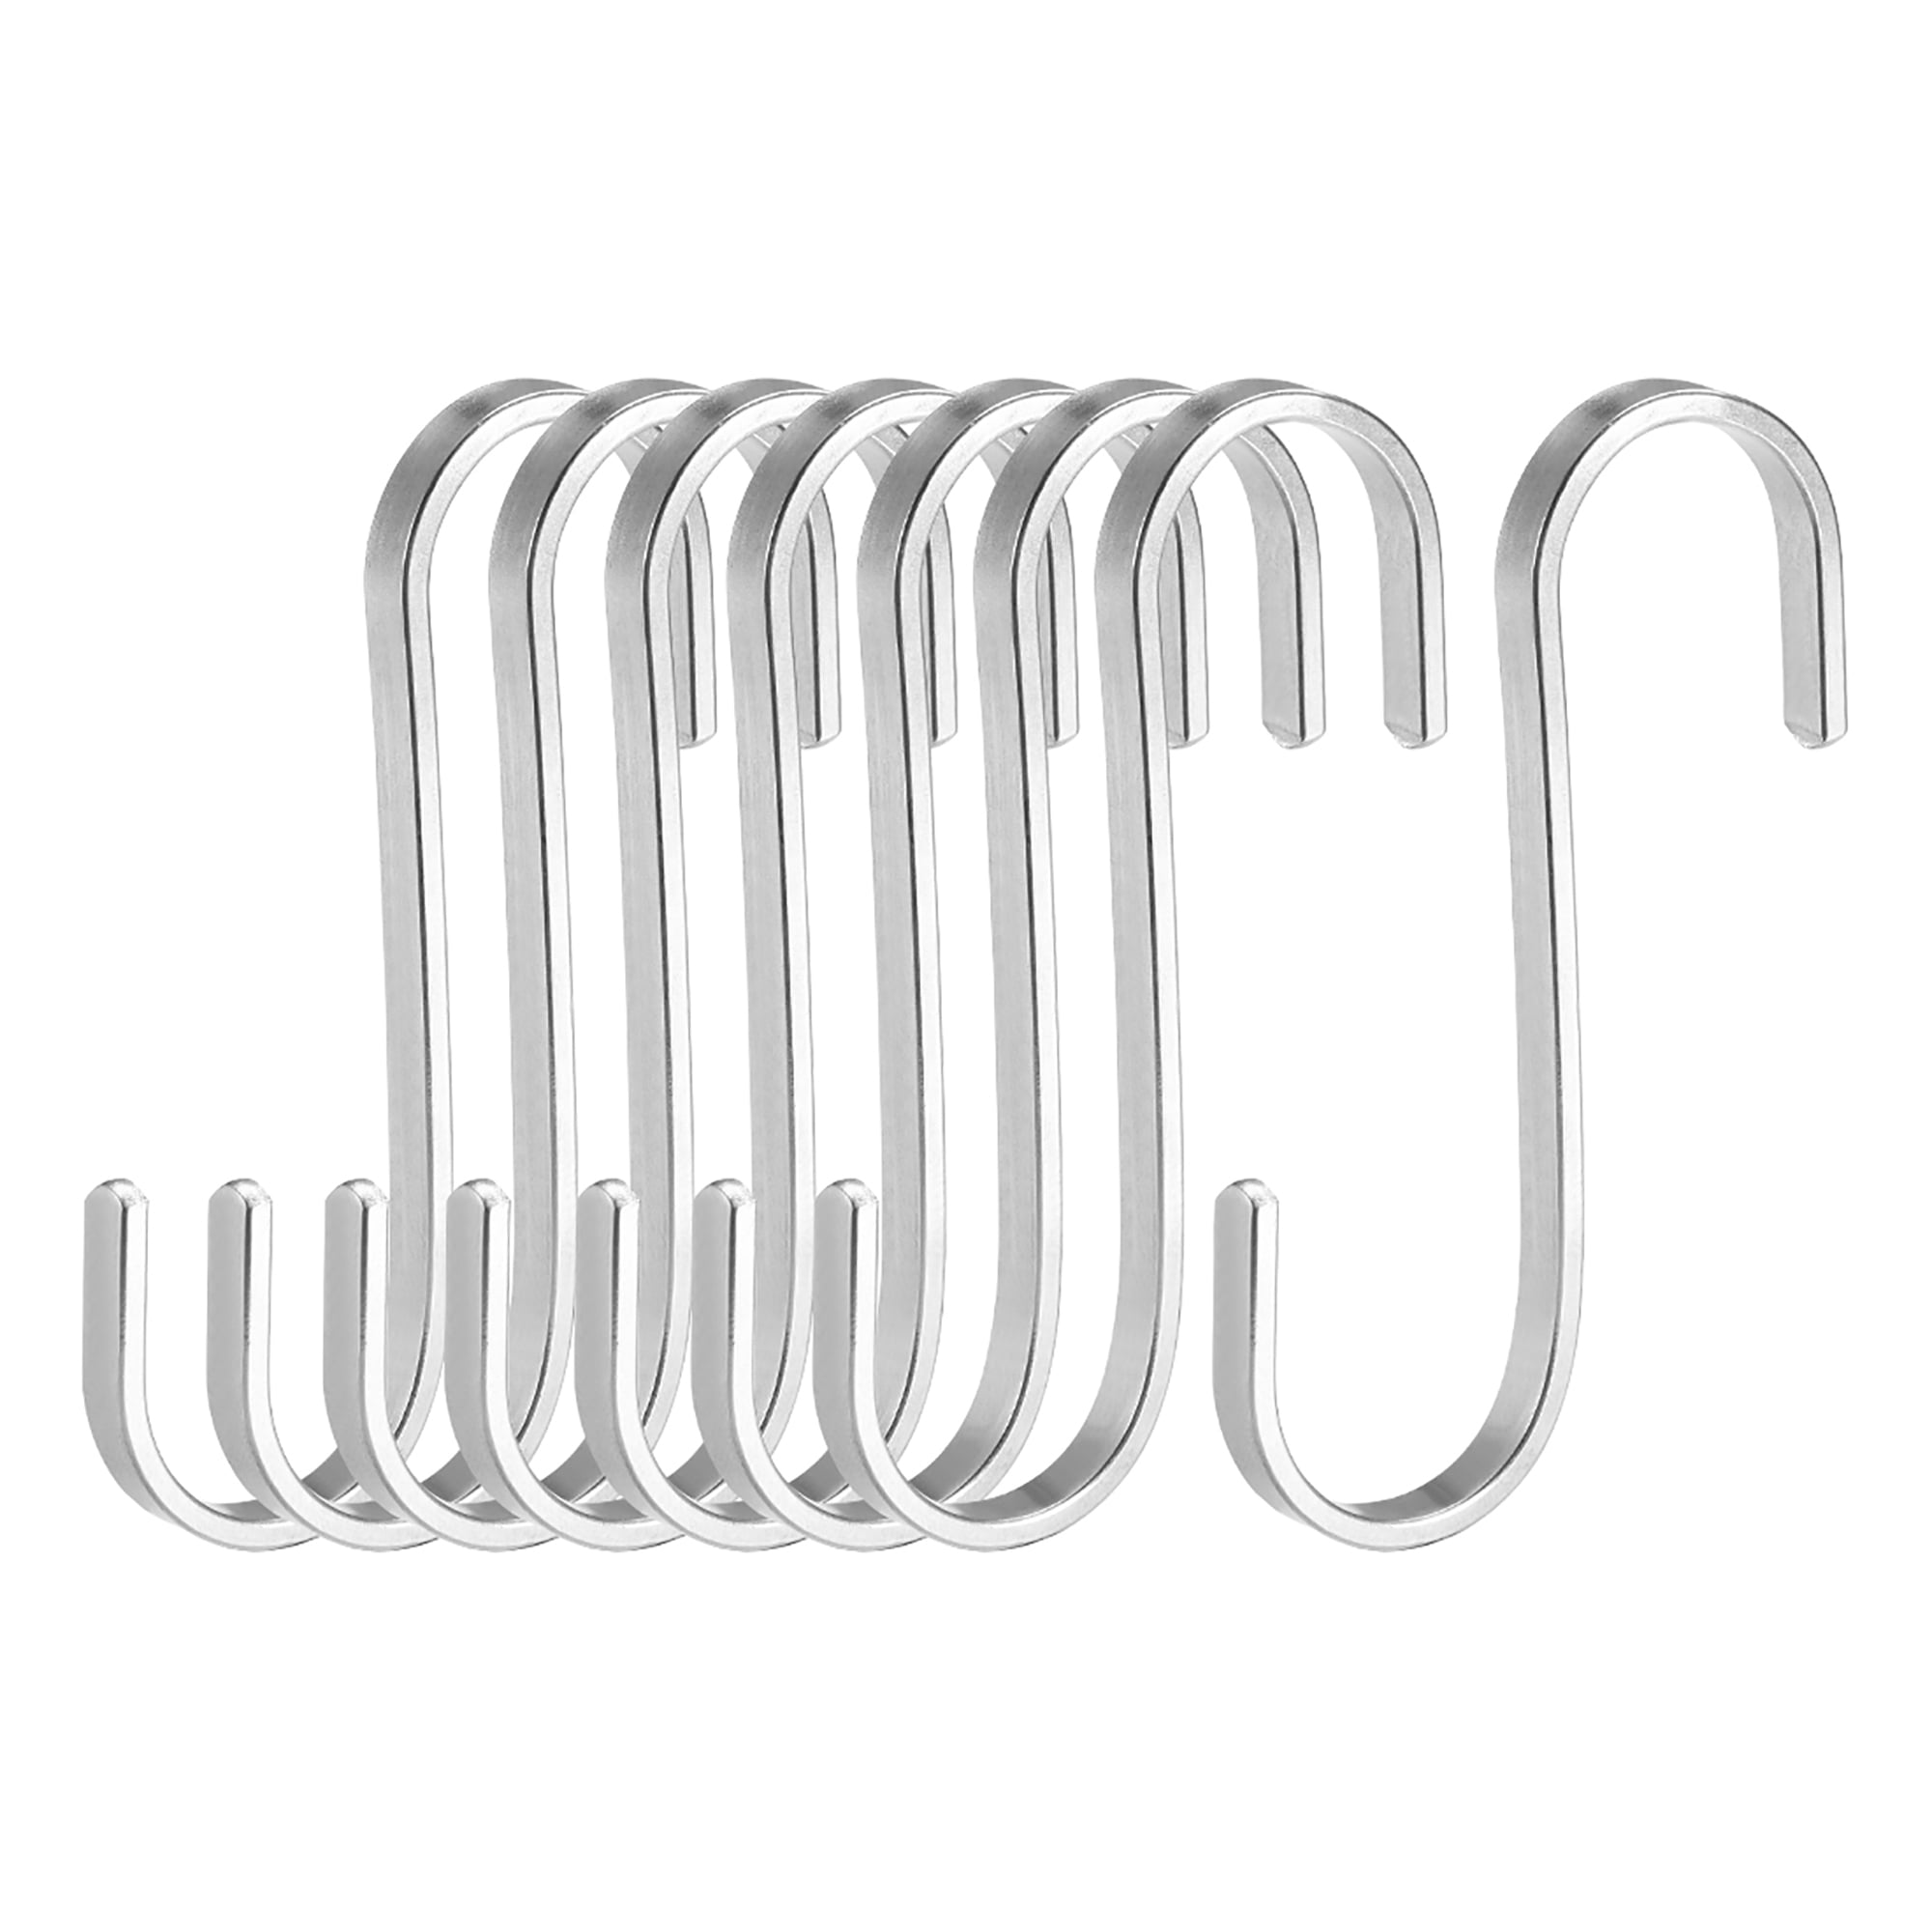 Details about   20 Pack Heavy Duty S Hooks Stainless Steel S Shaped Hanging Hooks Hangers For Ki 